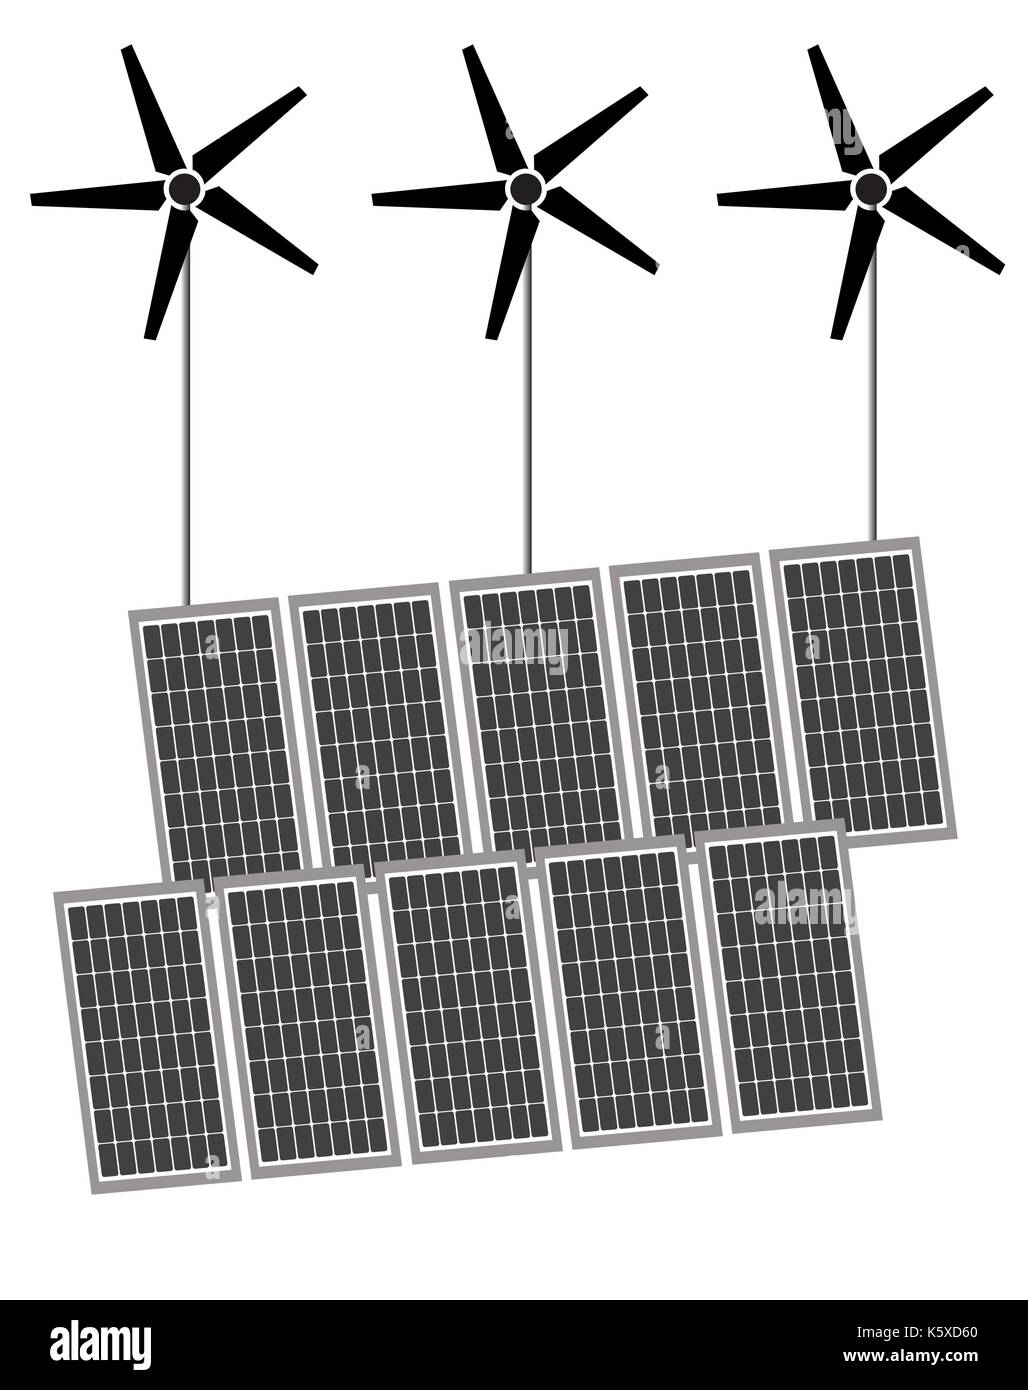 Solar panels and turbine isolated Stock Vector